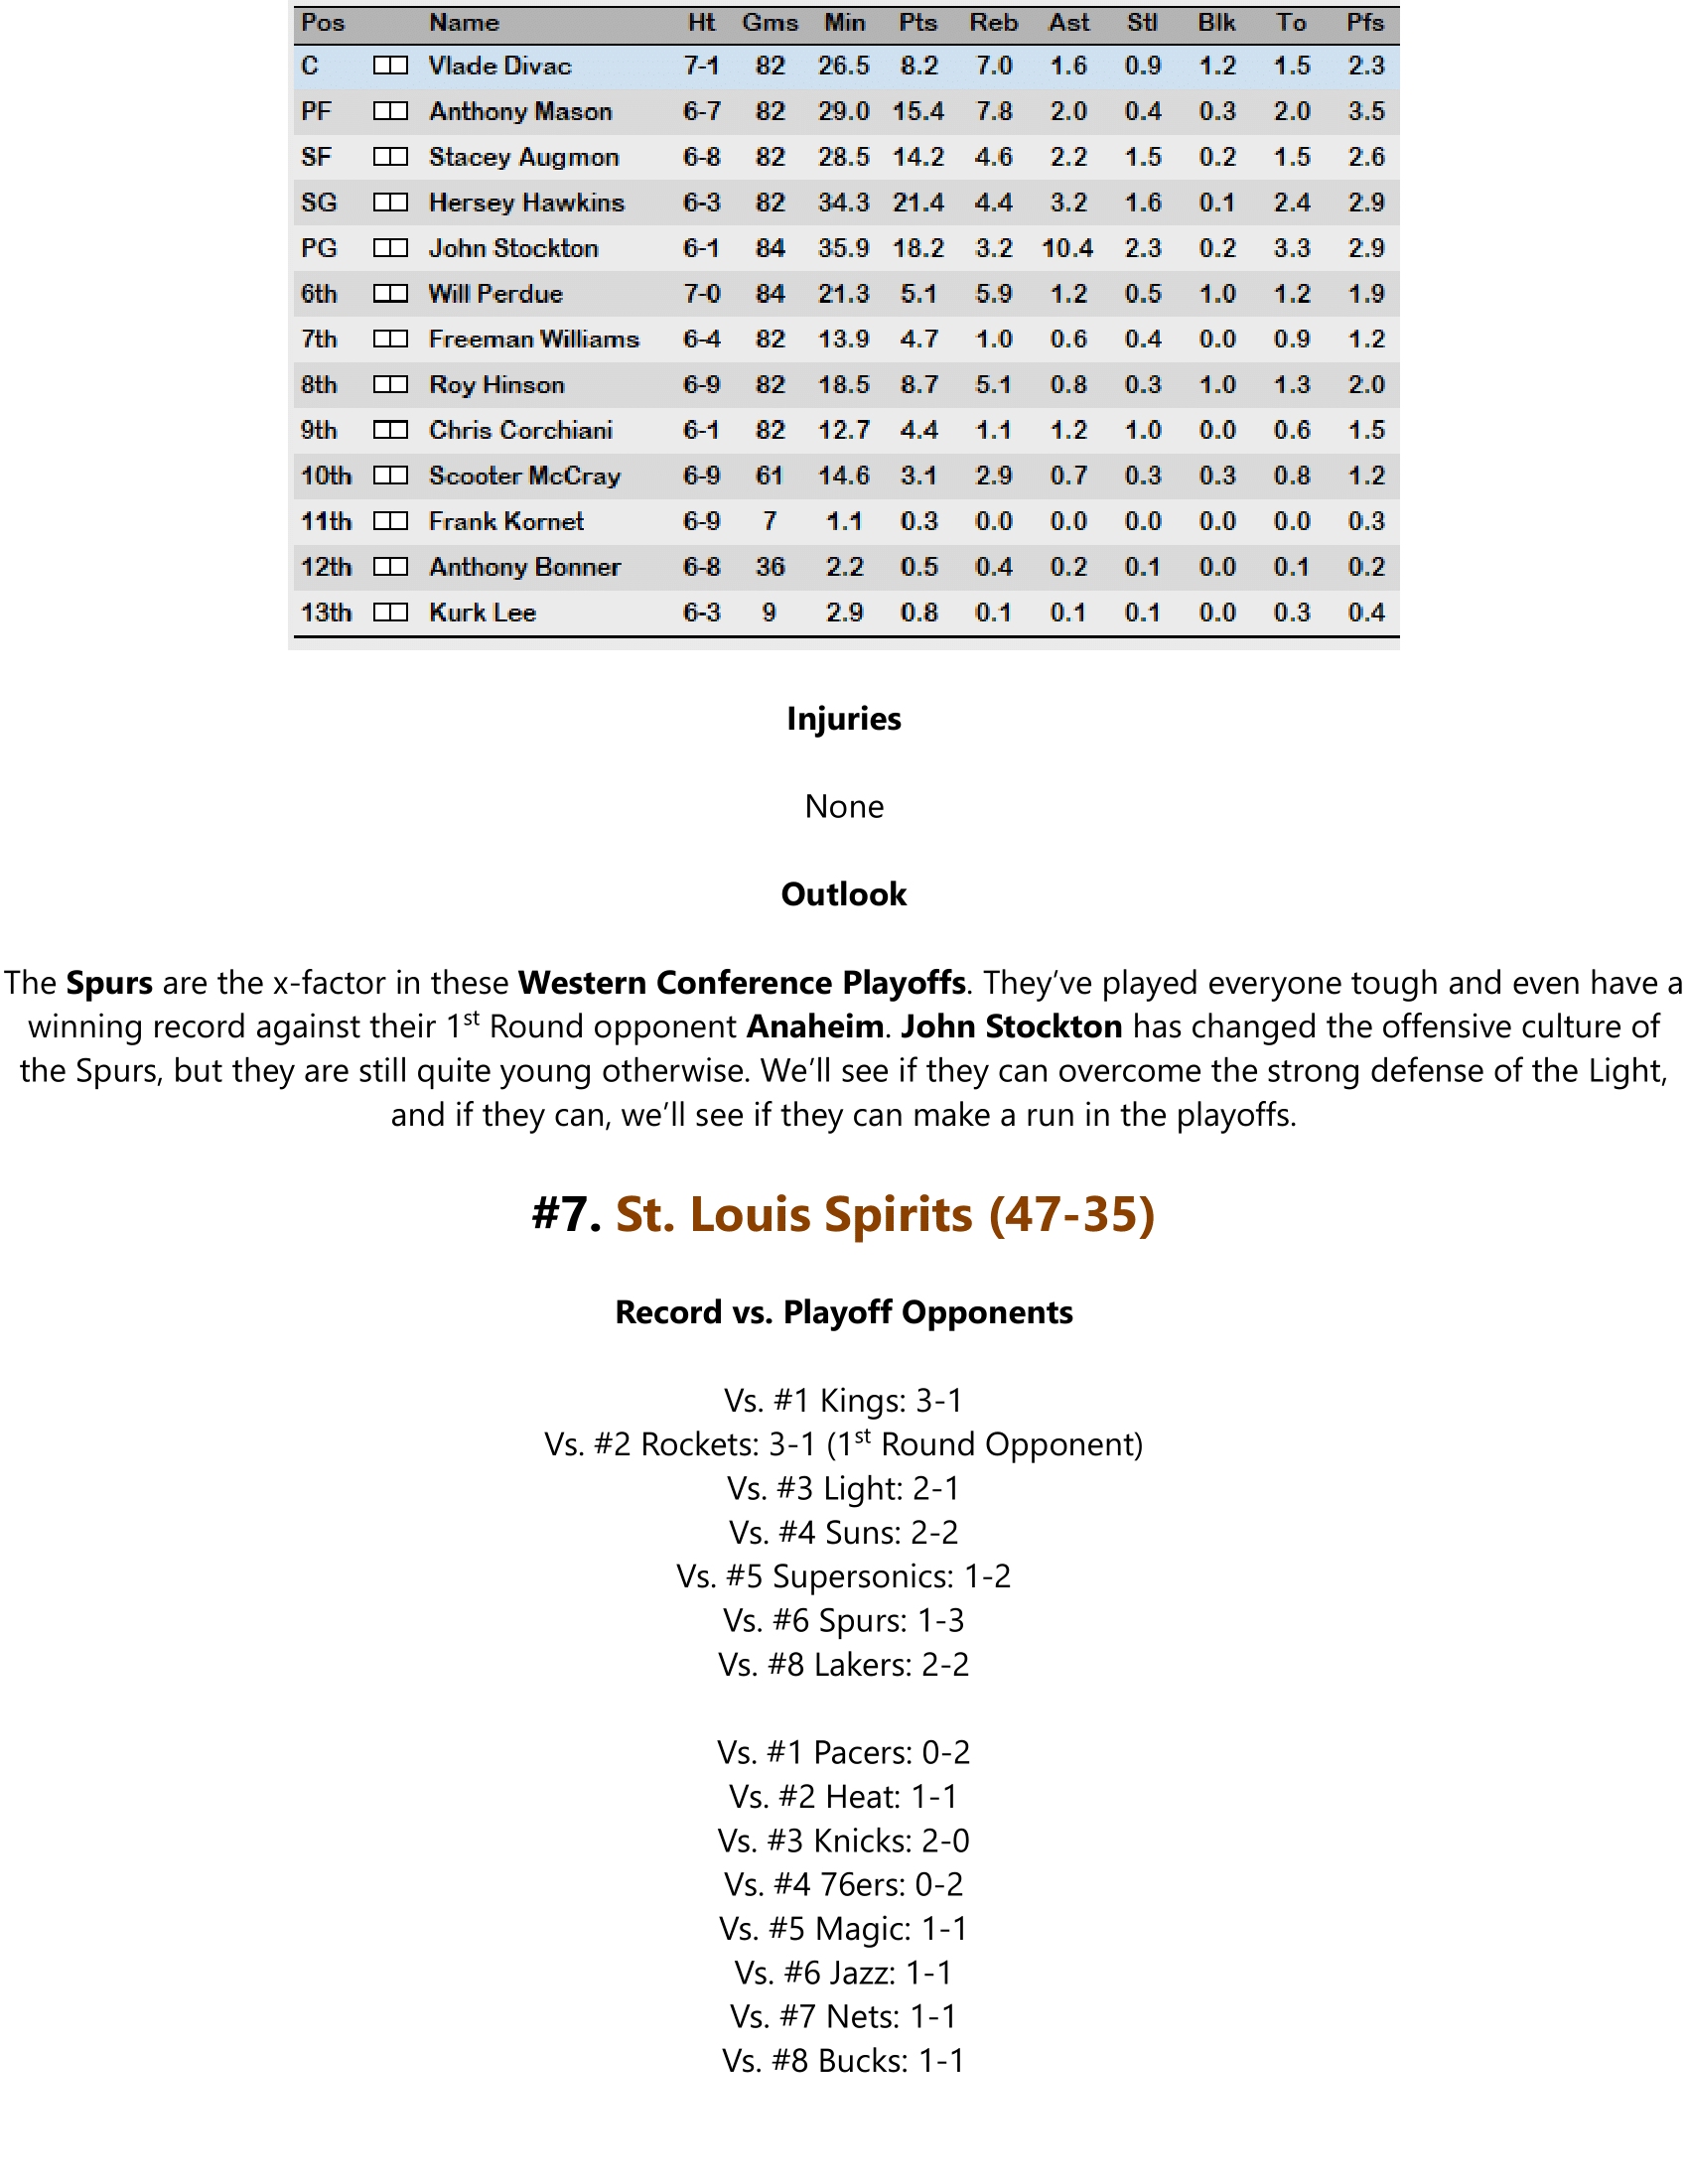 91-92-Part-4-Playoff-Preview-10.png